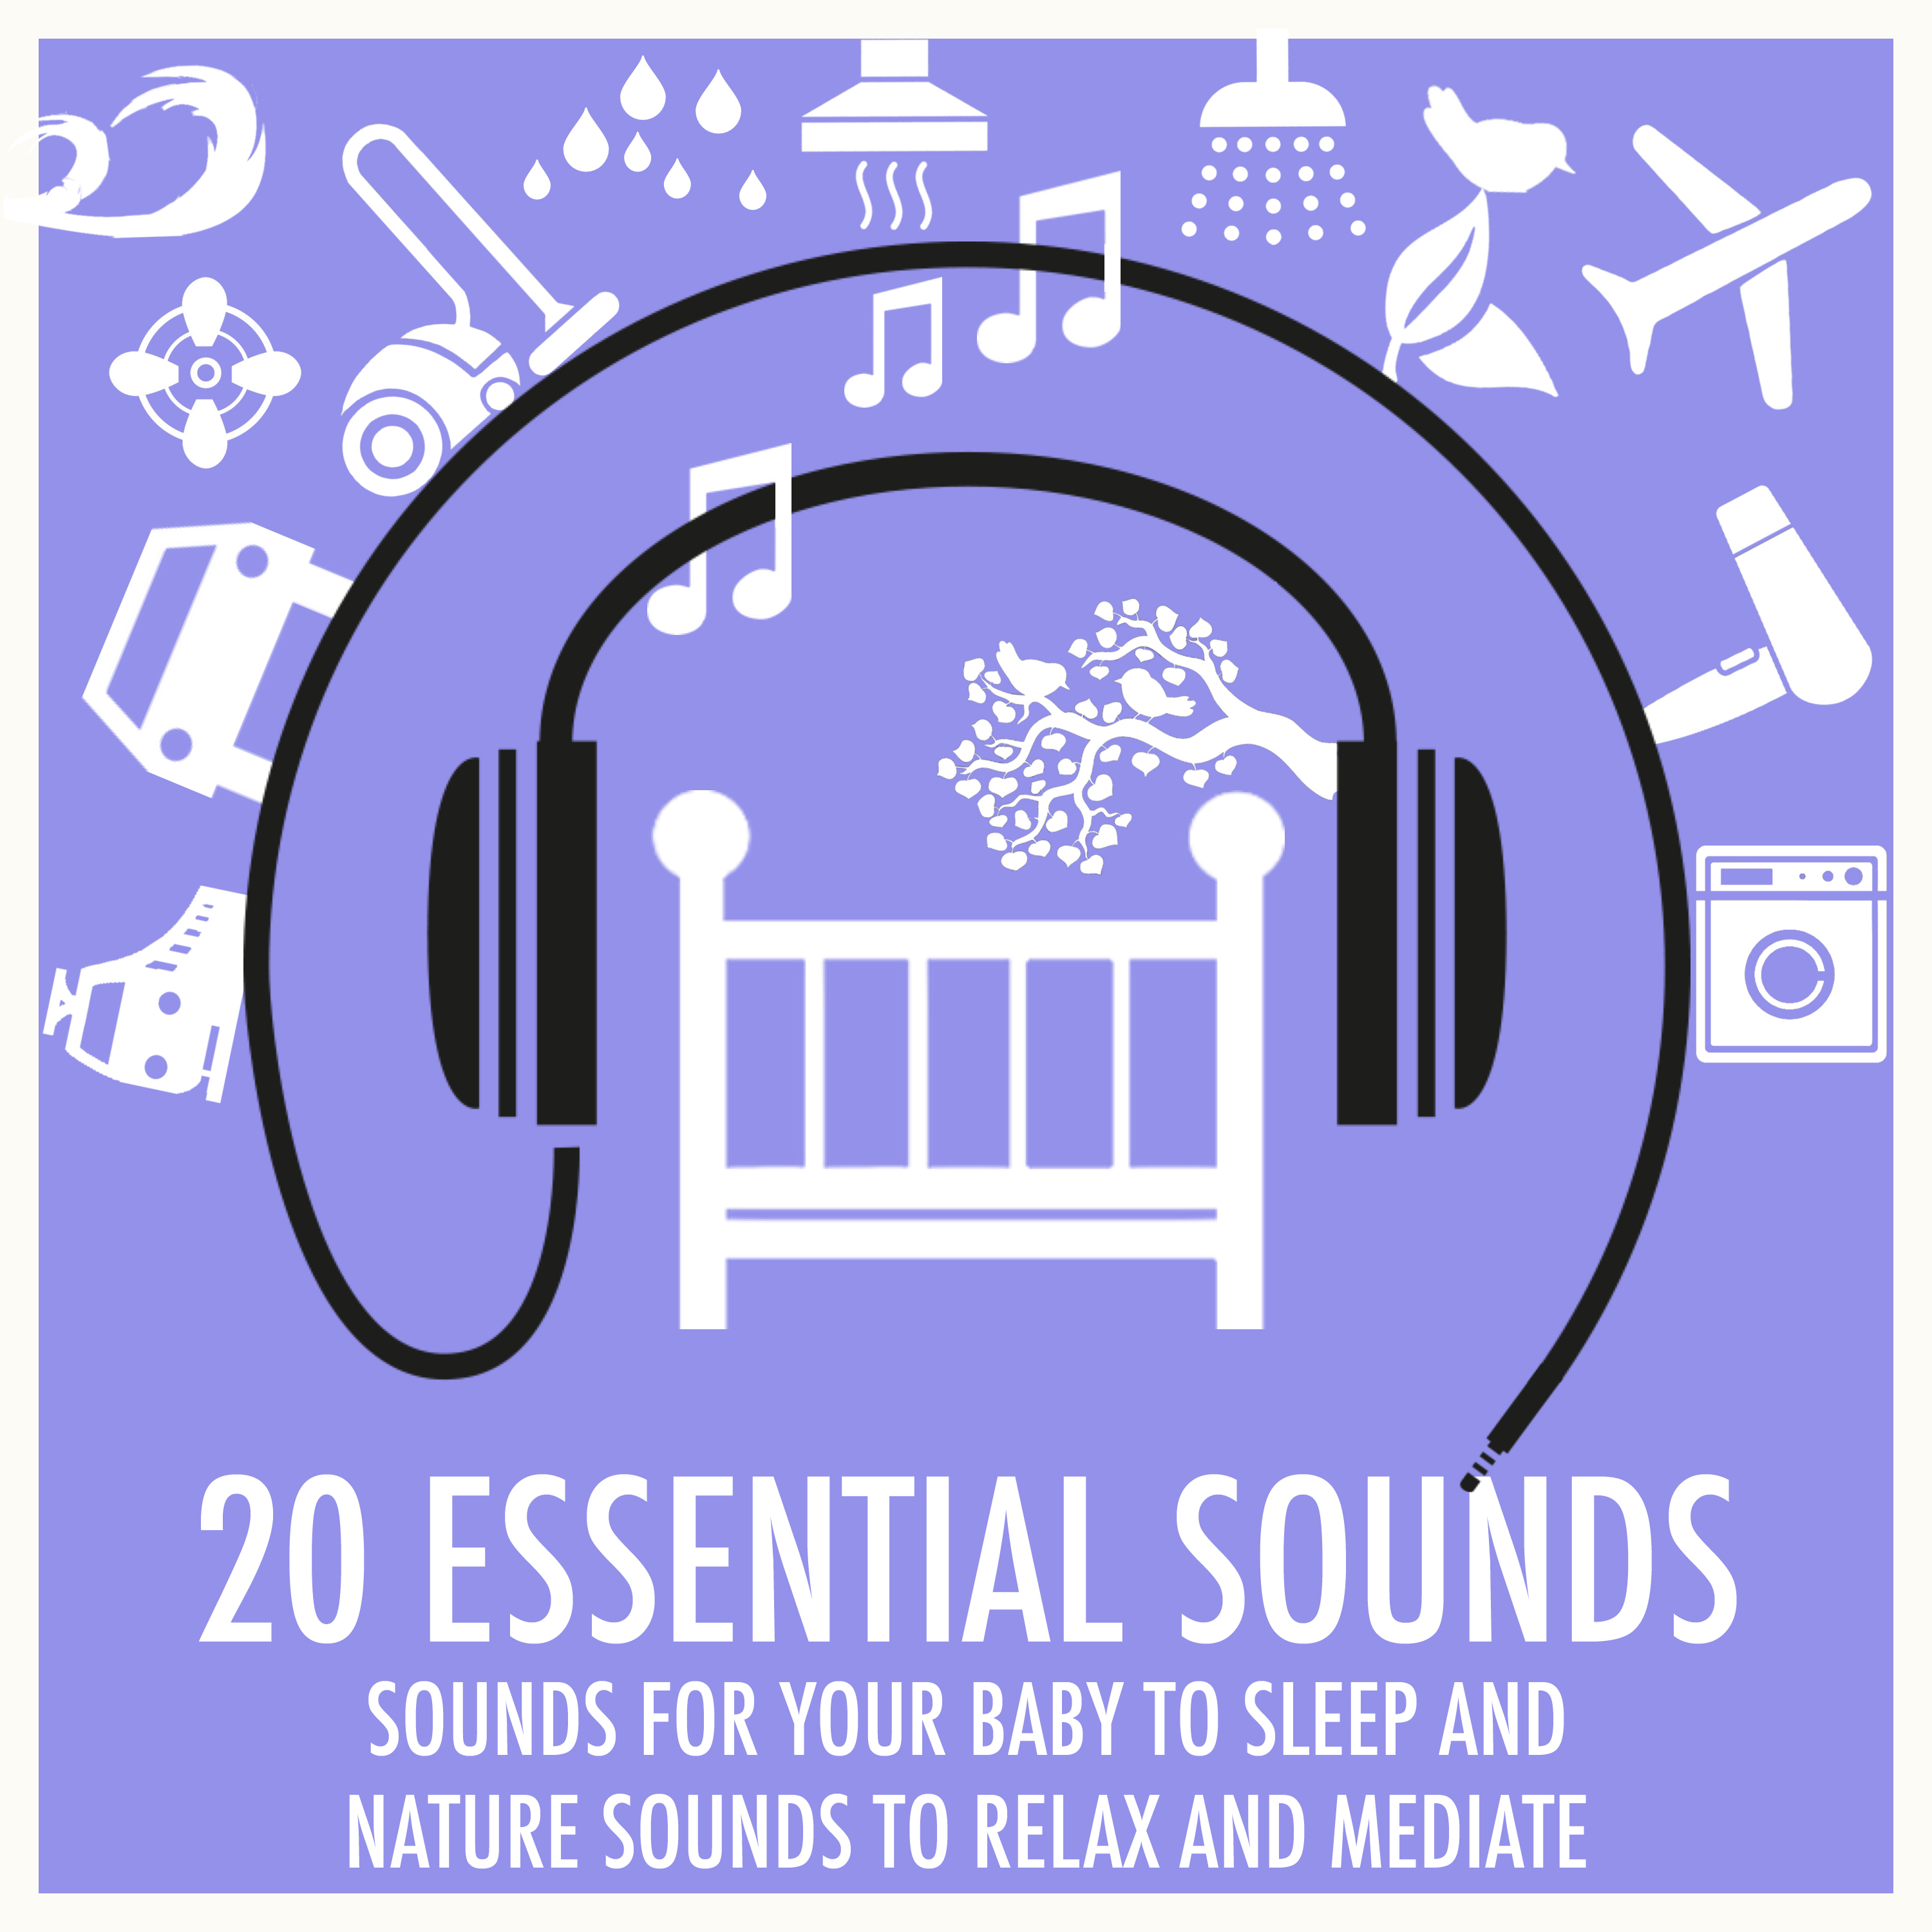 Sounds for Your Baby to Sleep and Nature Sounds to Relax and Meditate